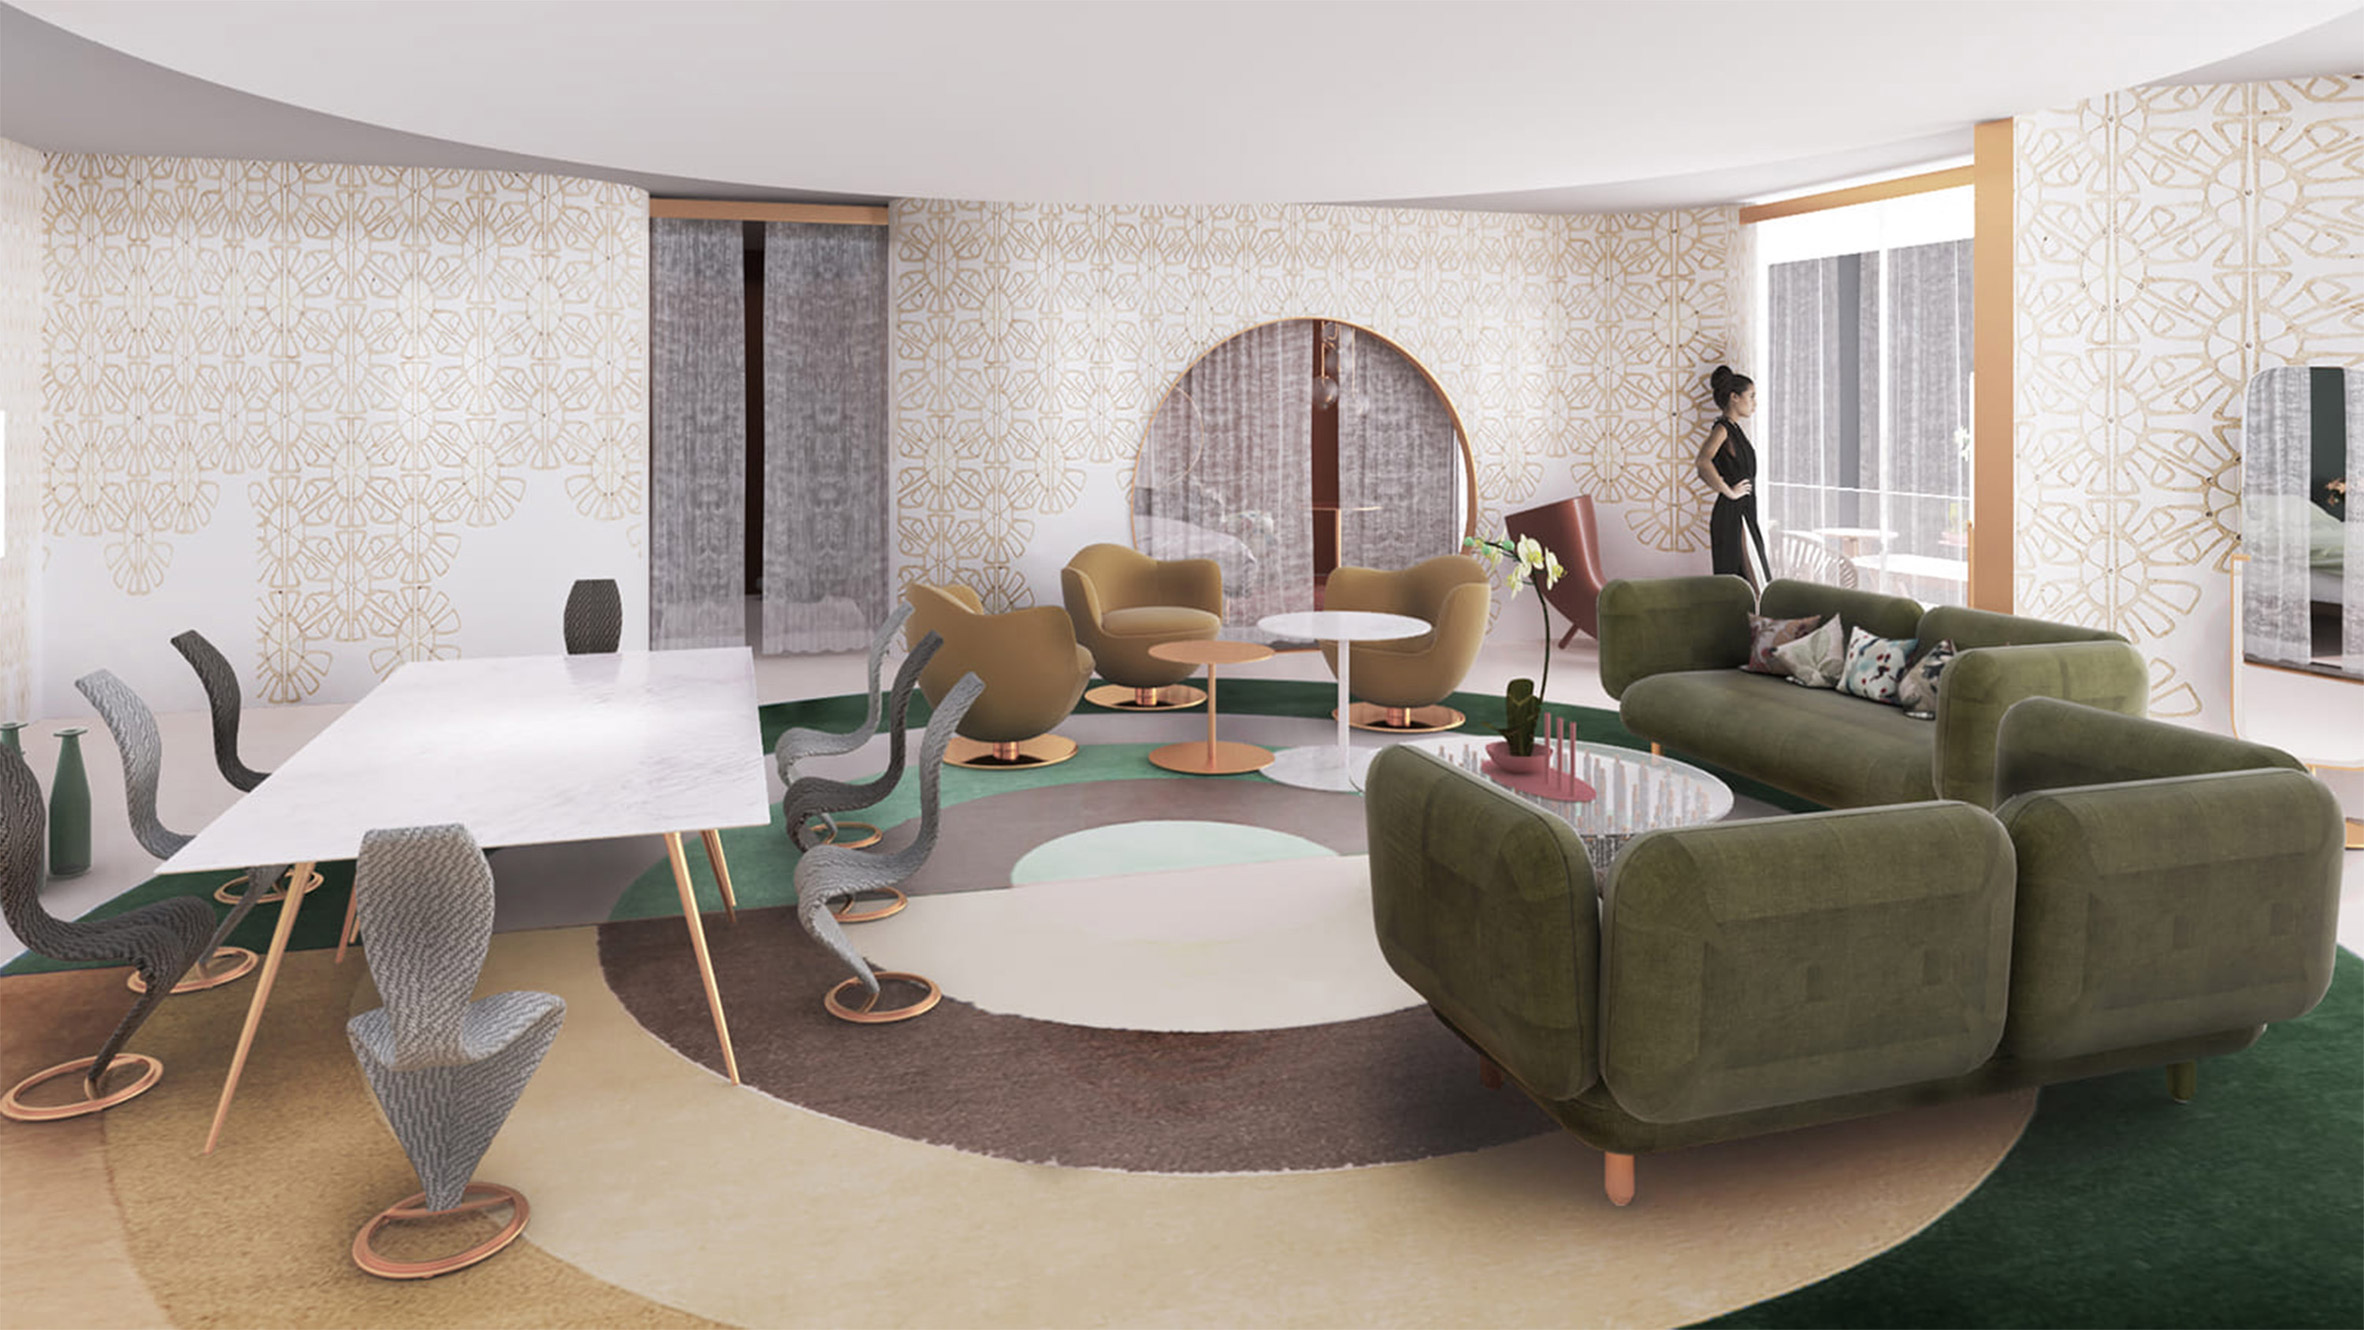 Interior render of a living space by student at Istituto Marangoni